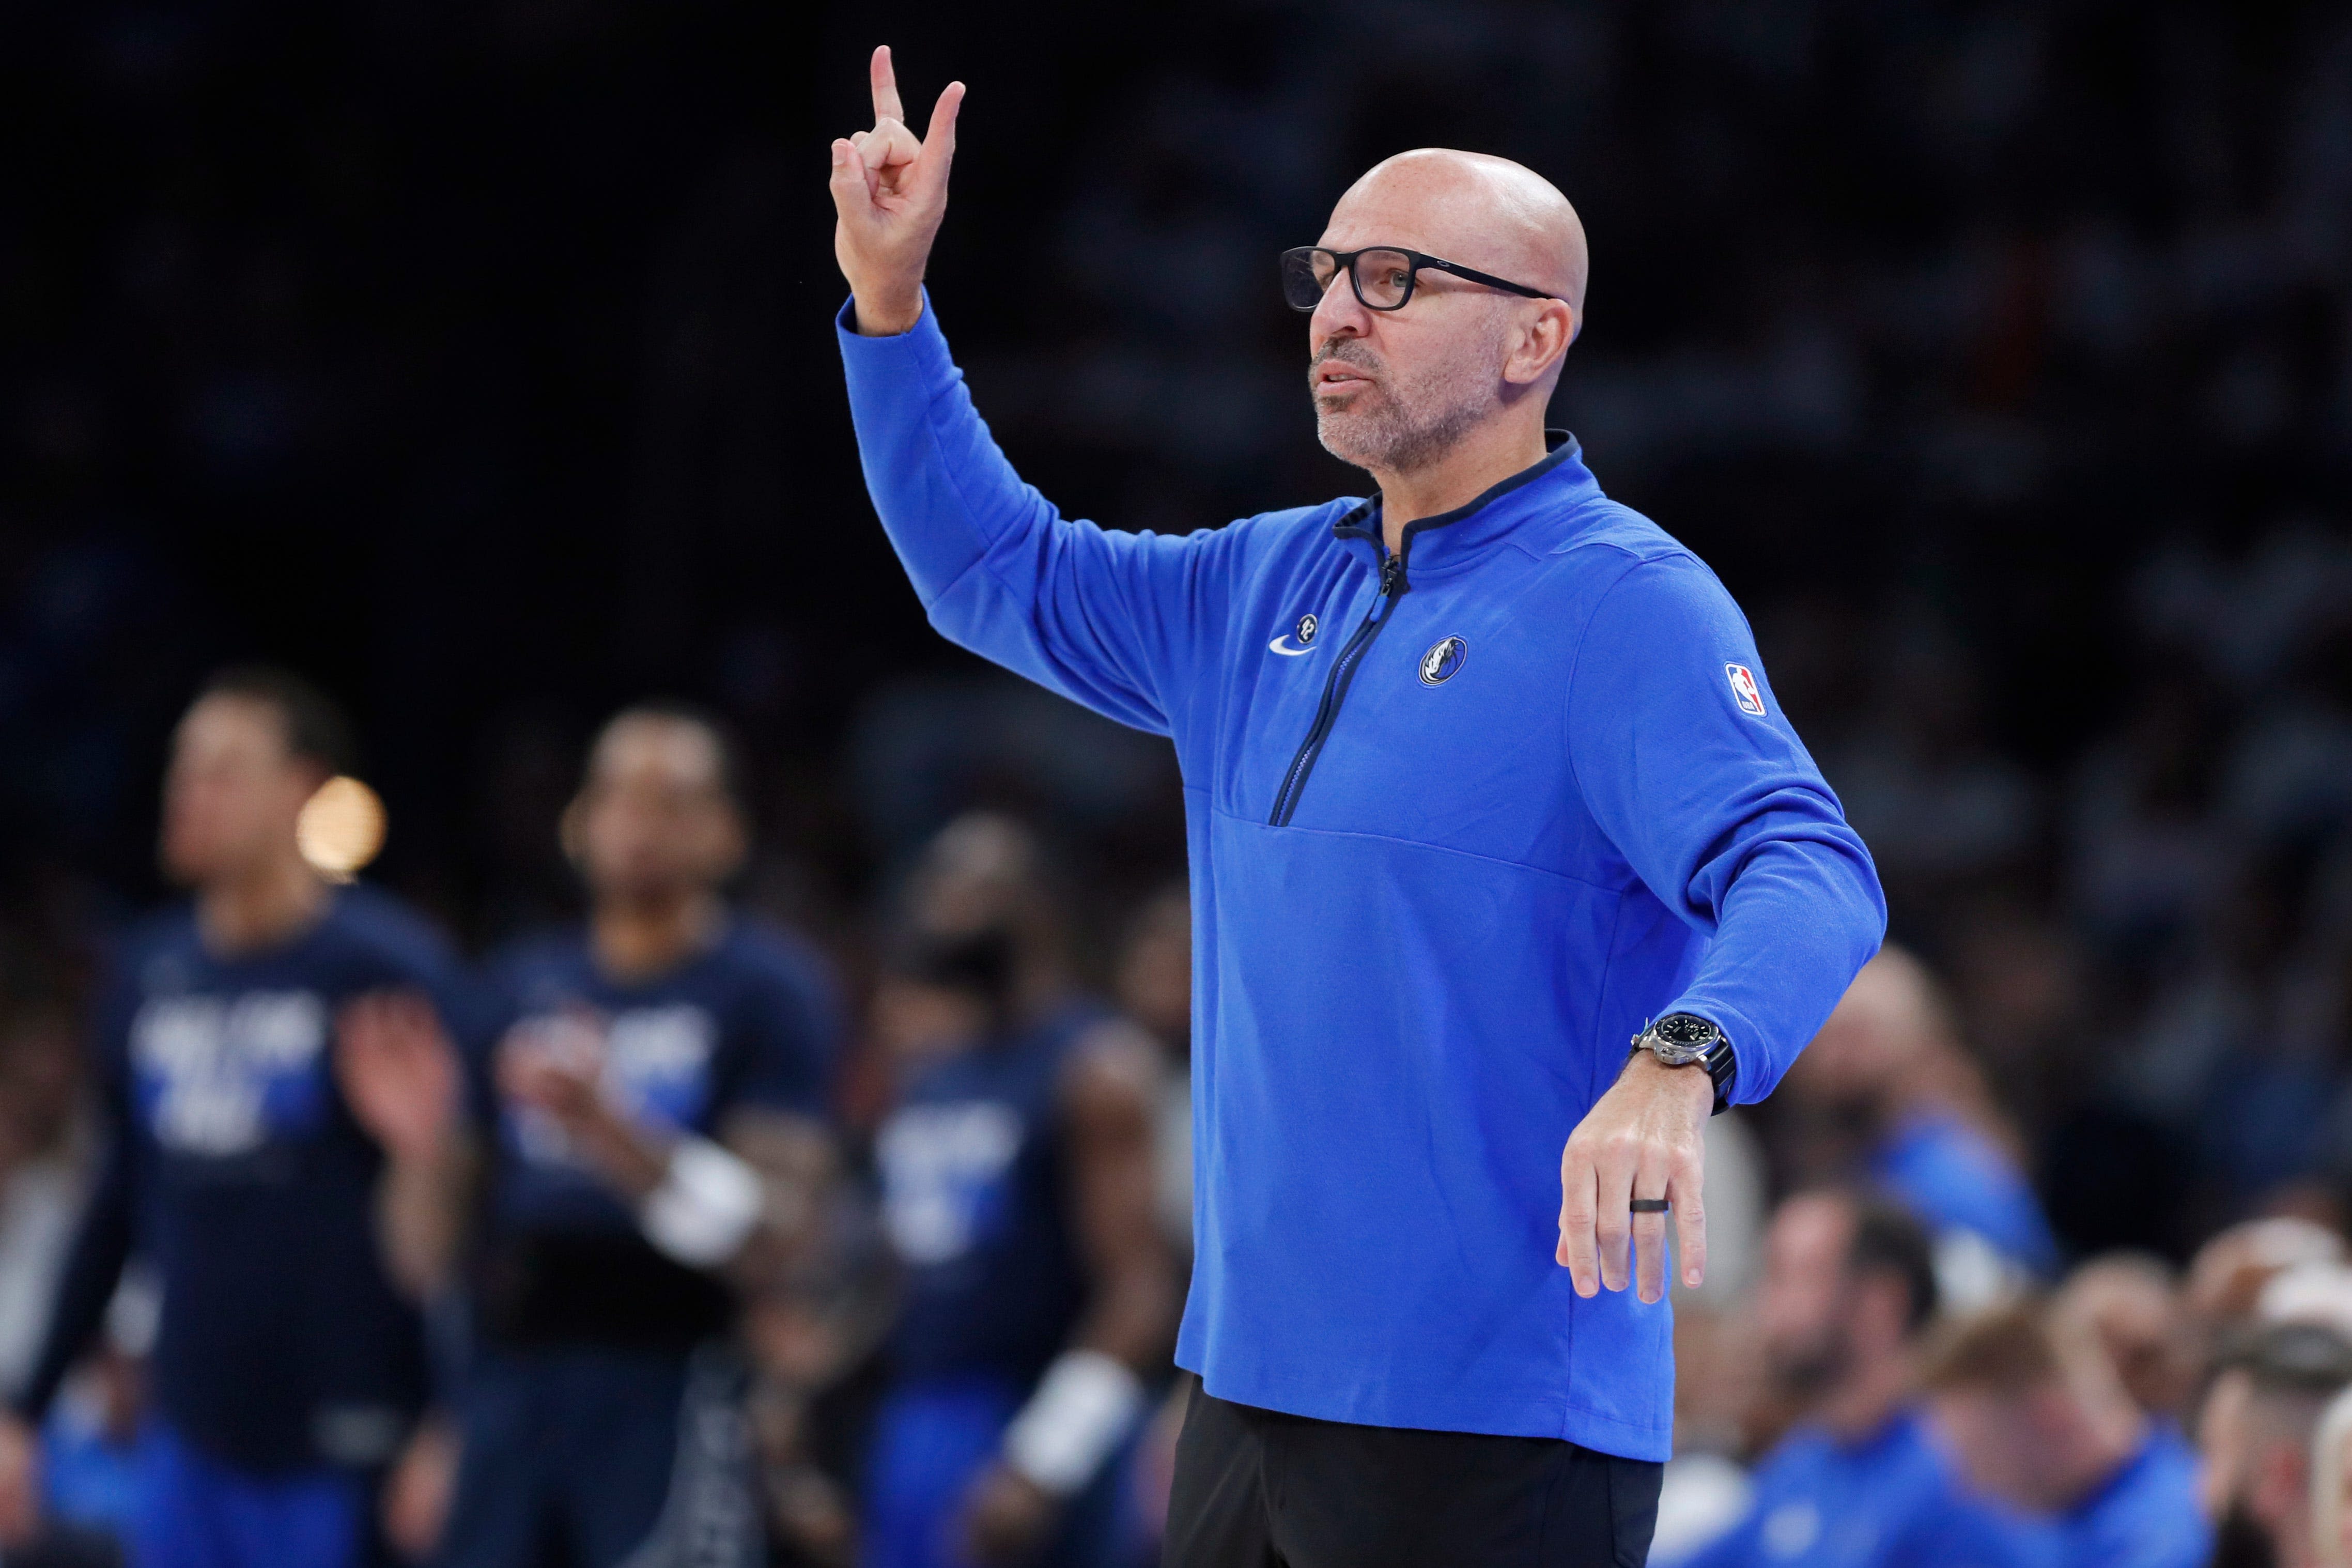 After Game 1 victory, former Bucks coach Jason Kidd moves closer to NBA Finals